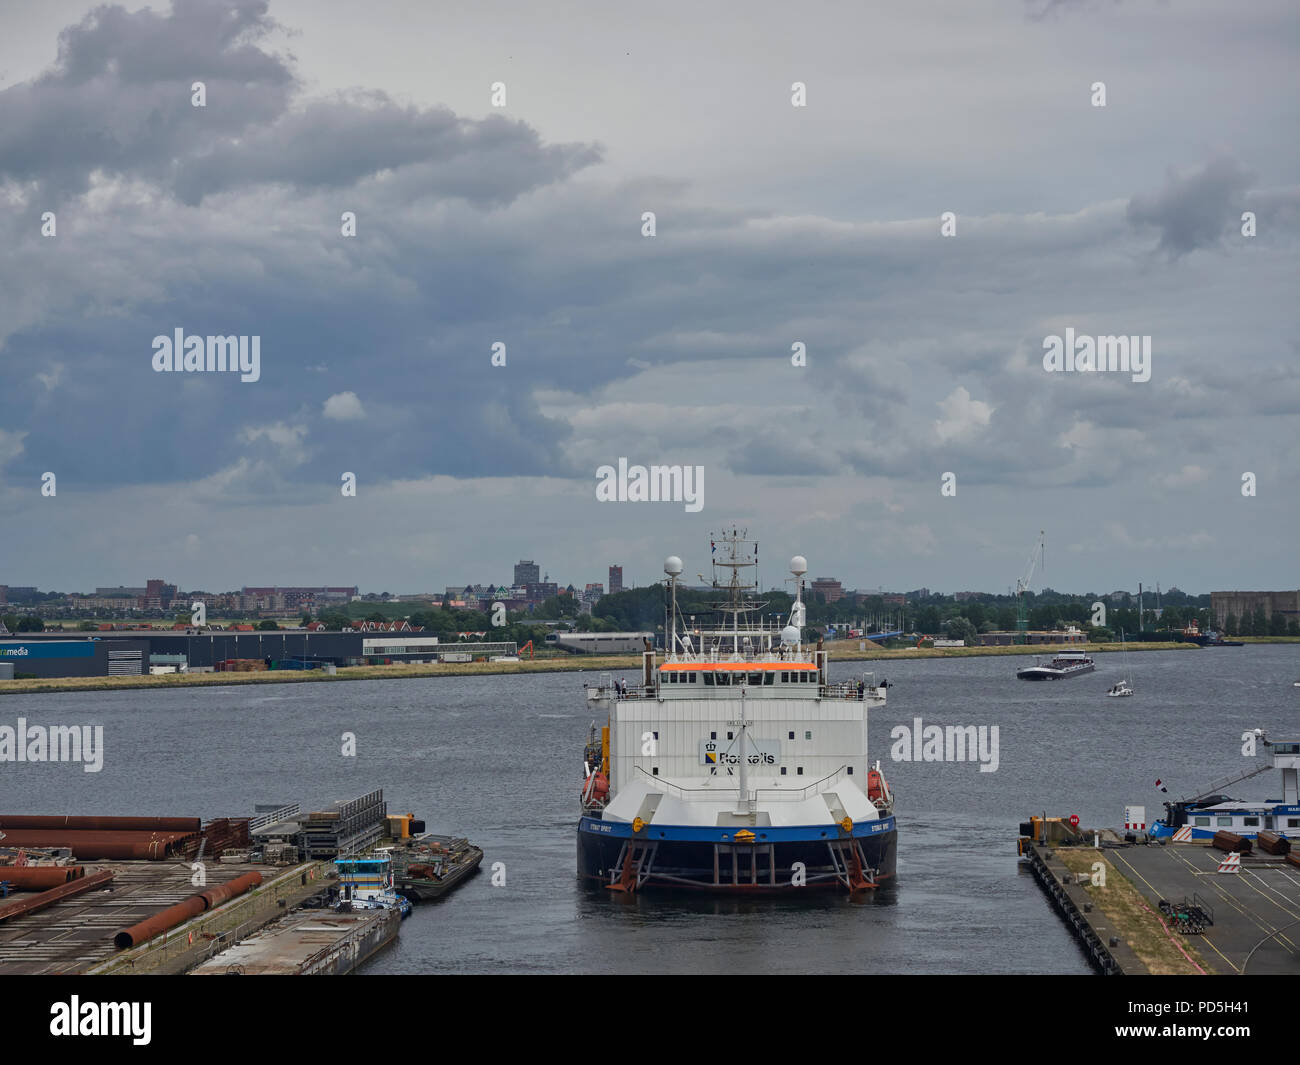 The Stemat Spirit, a Specialist Anchor Handler and Cable Laying Vessel Departing its narrow Berth in Den Haag, Amsterdam, The Netherlands. Stock Photo